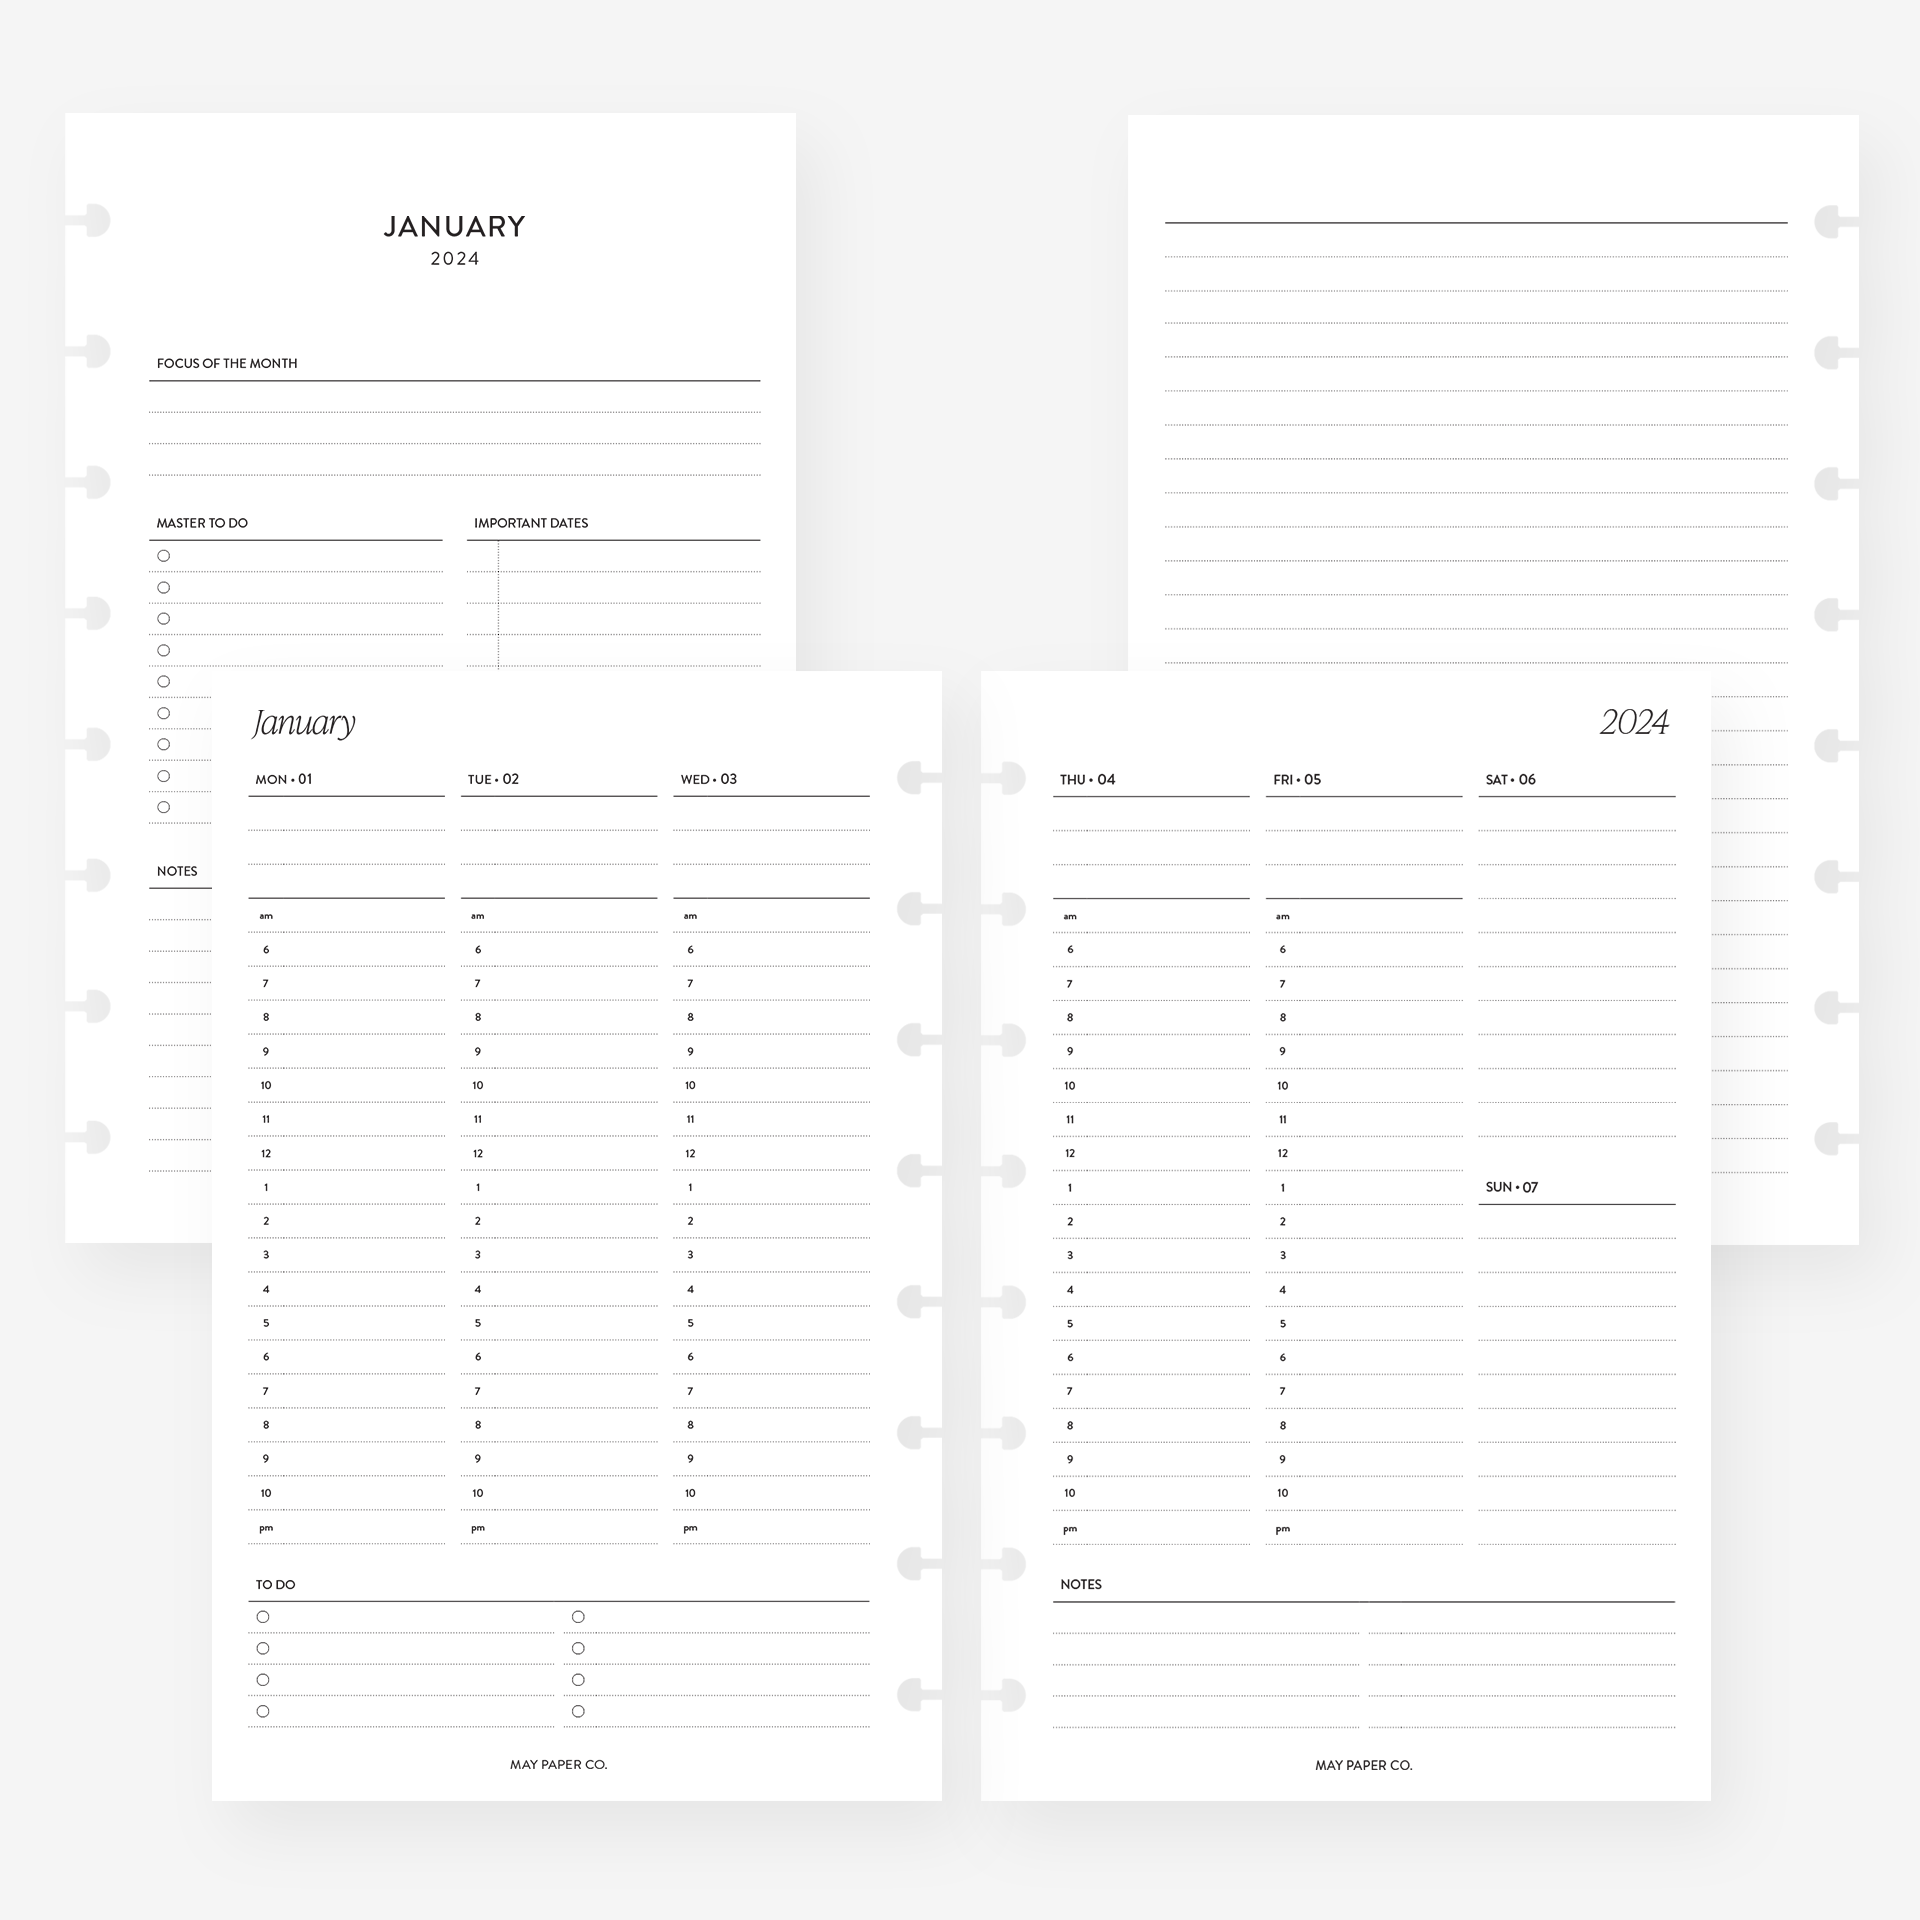 PRINTED A5 Week On One Page Planner Inserts | Weekly Overview | Printed  Weekly Planner To Fit Filofax, Kikki K, LV Agenda Planner Inserts